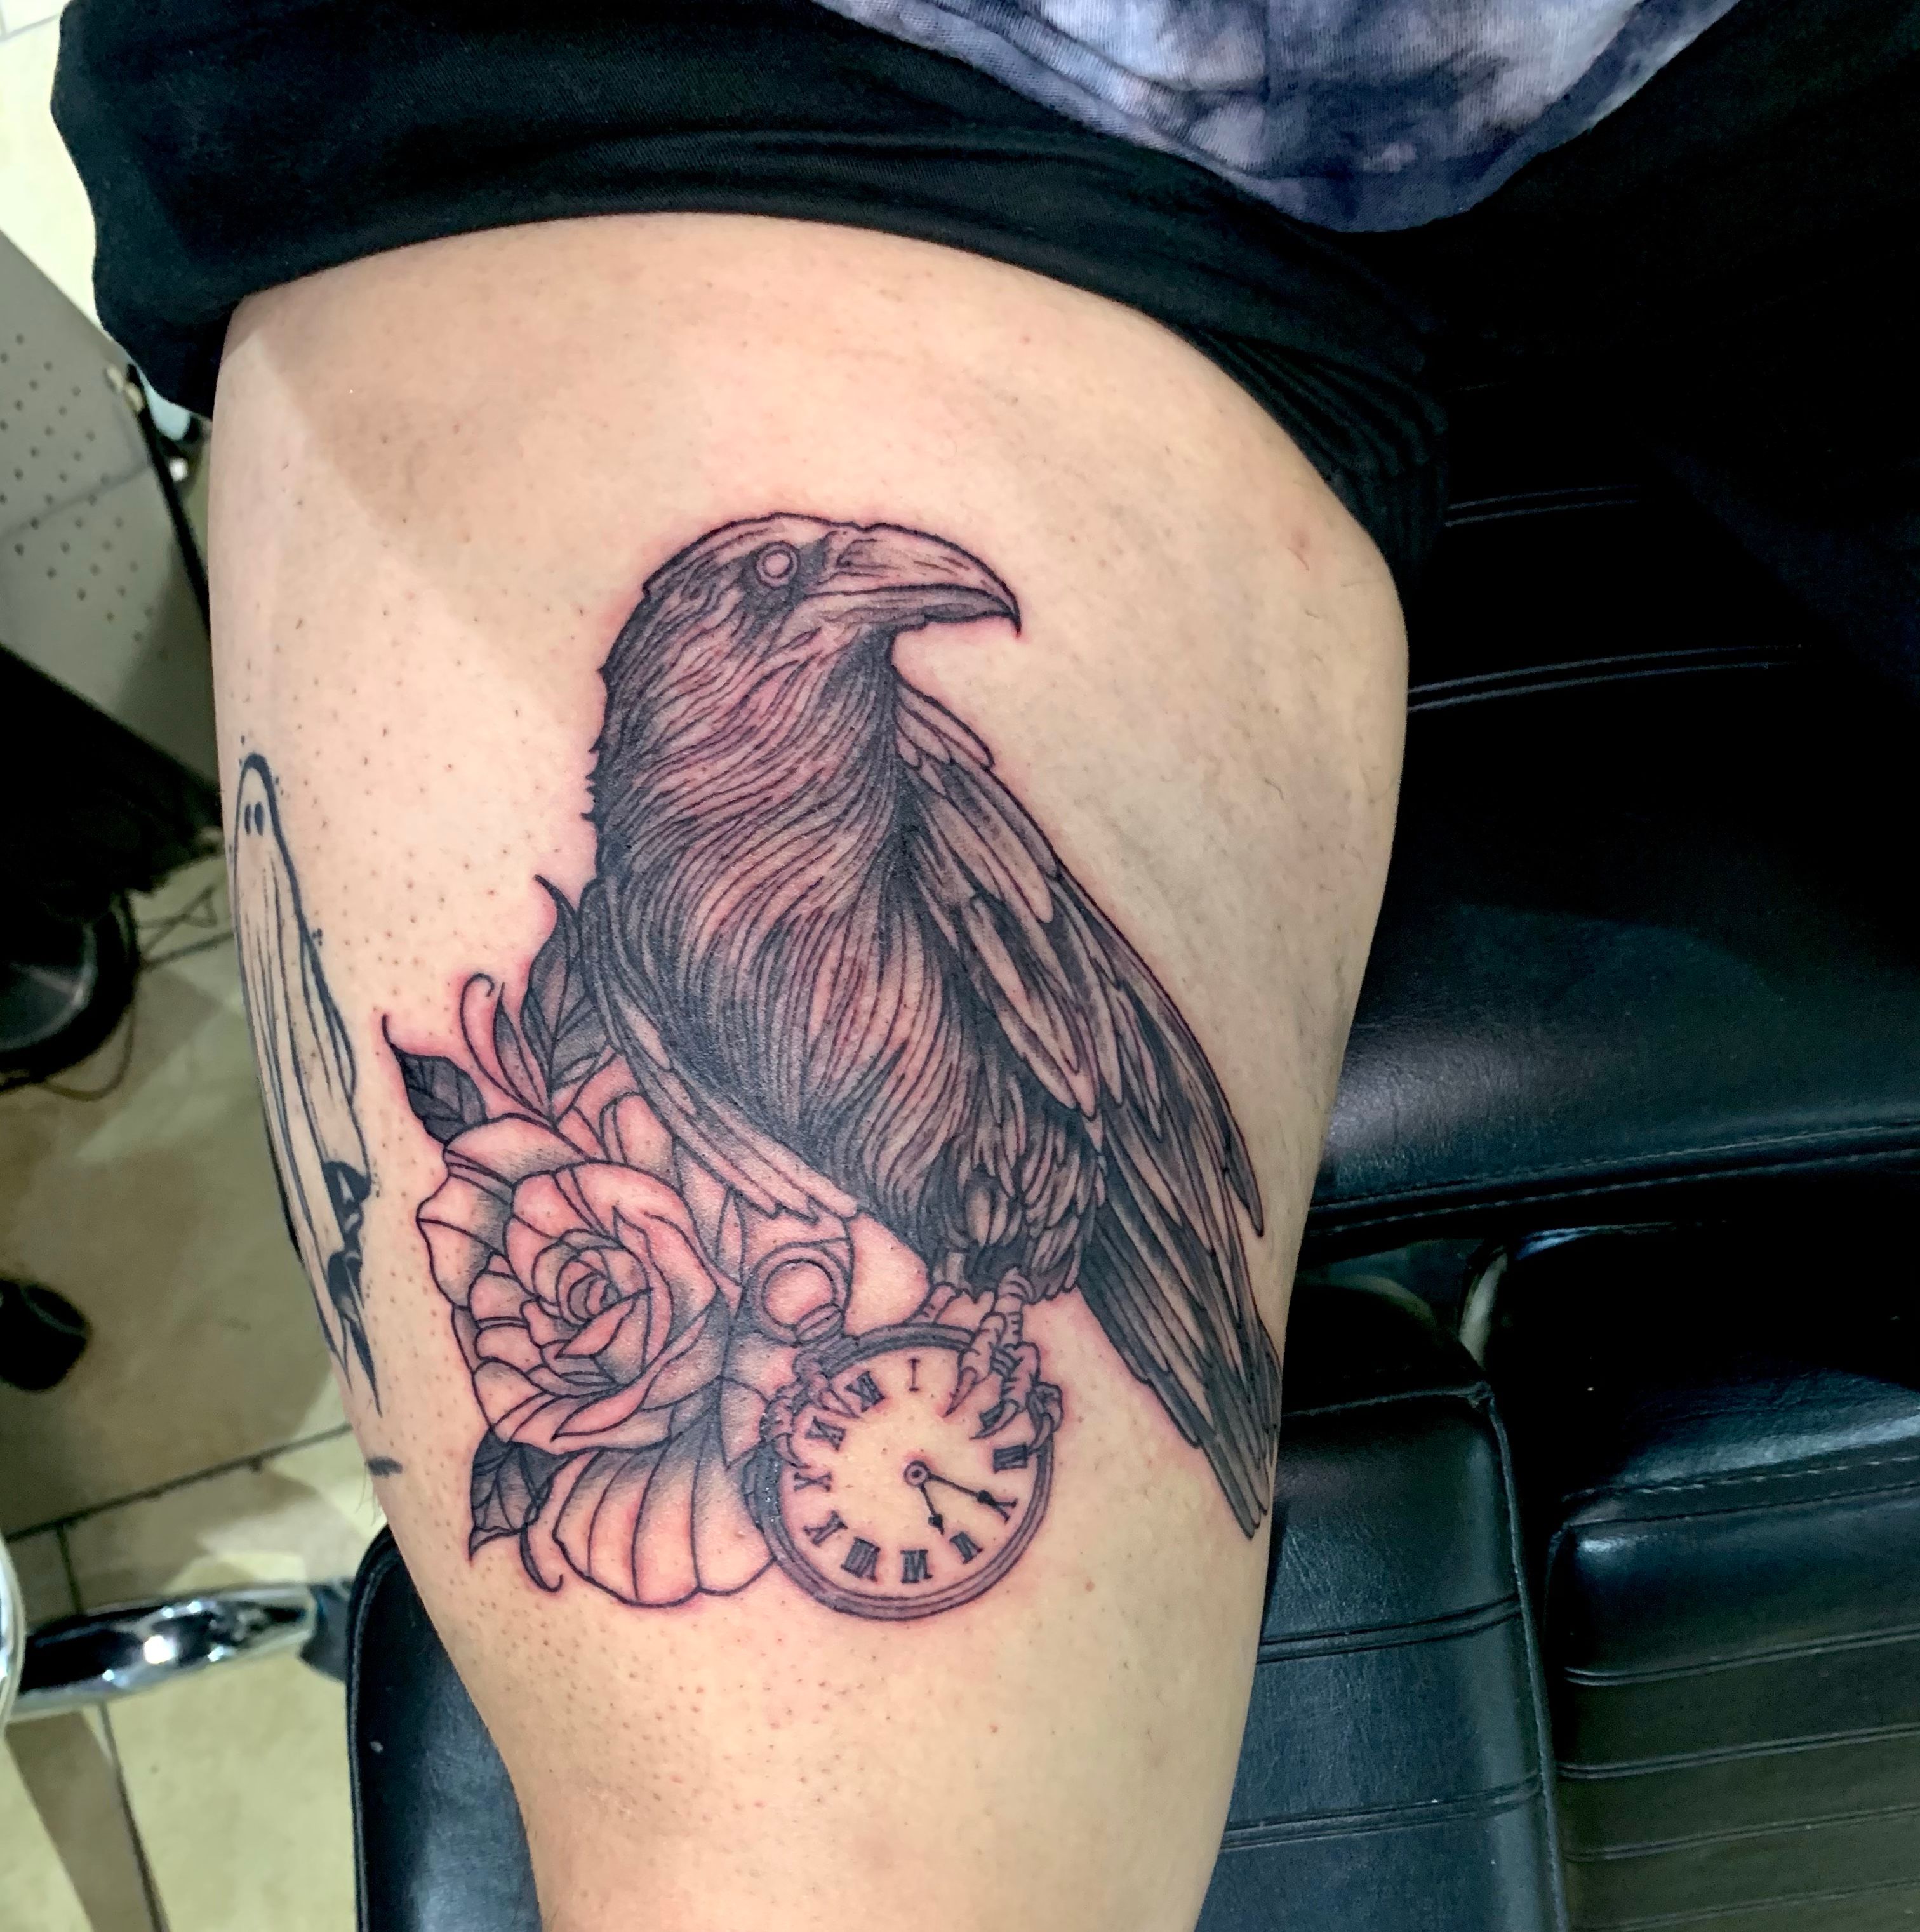 Yankee Doodlez Art  Let my heart be still a moment and this mystery  explore  Edgar Allen Poe The Raven Sick little raven tattoo I got to  do the other day